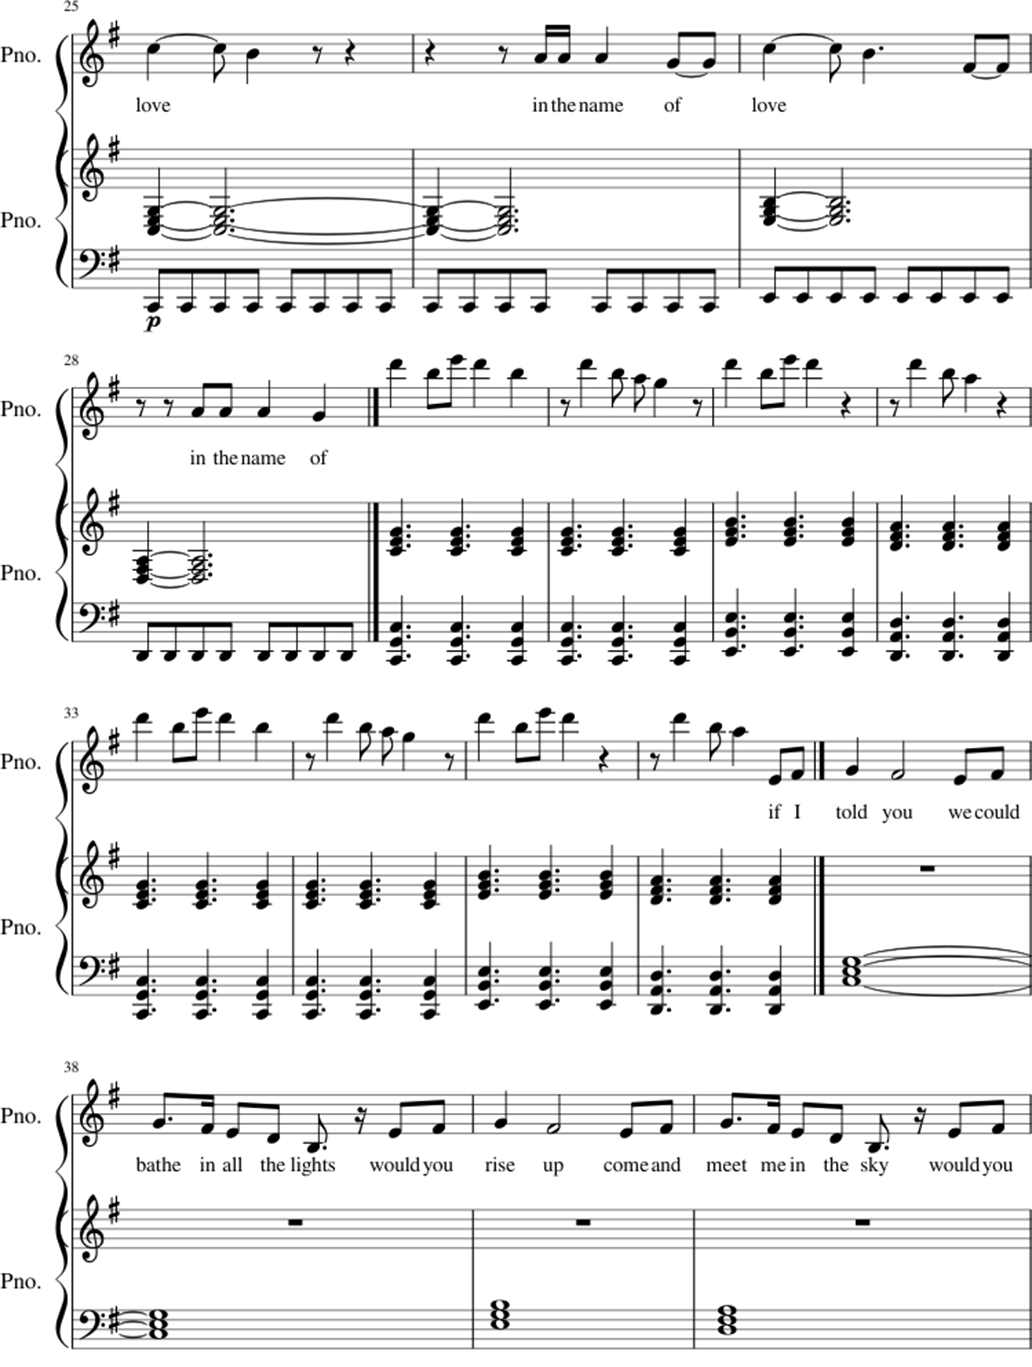 In the name of love sheet music notes 3